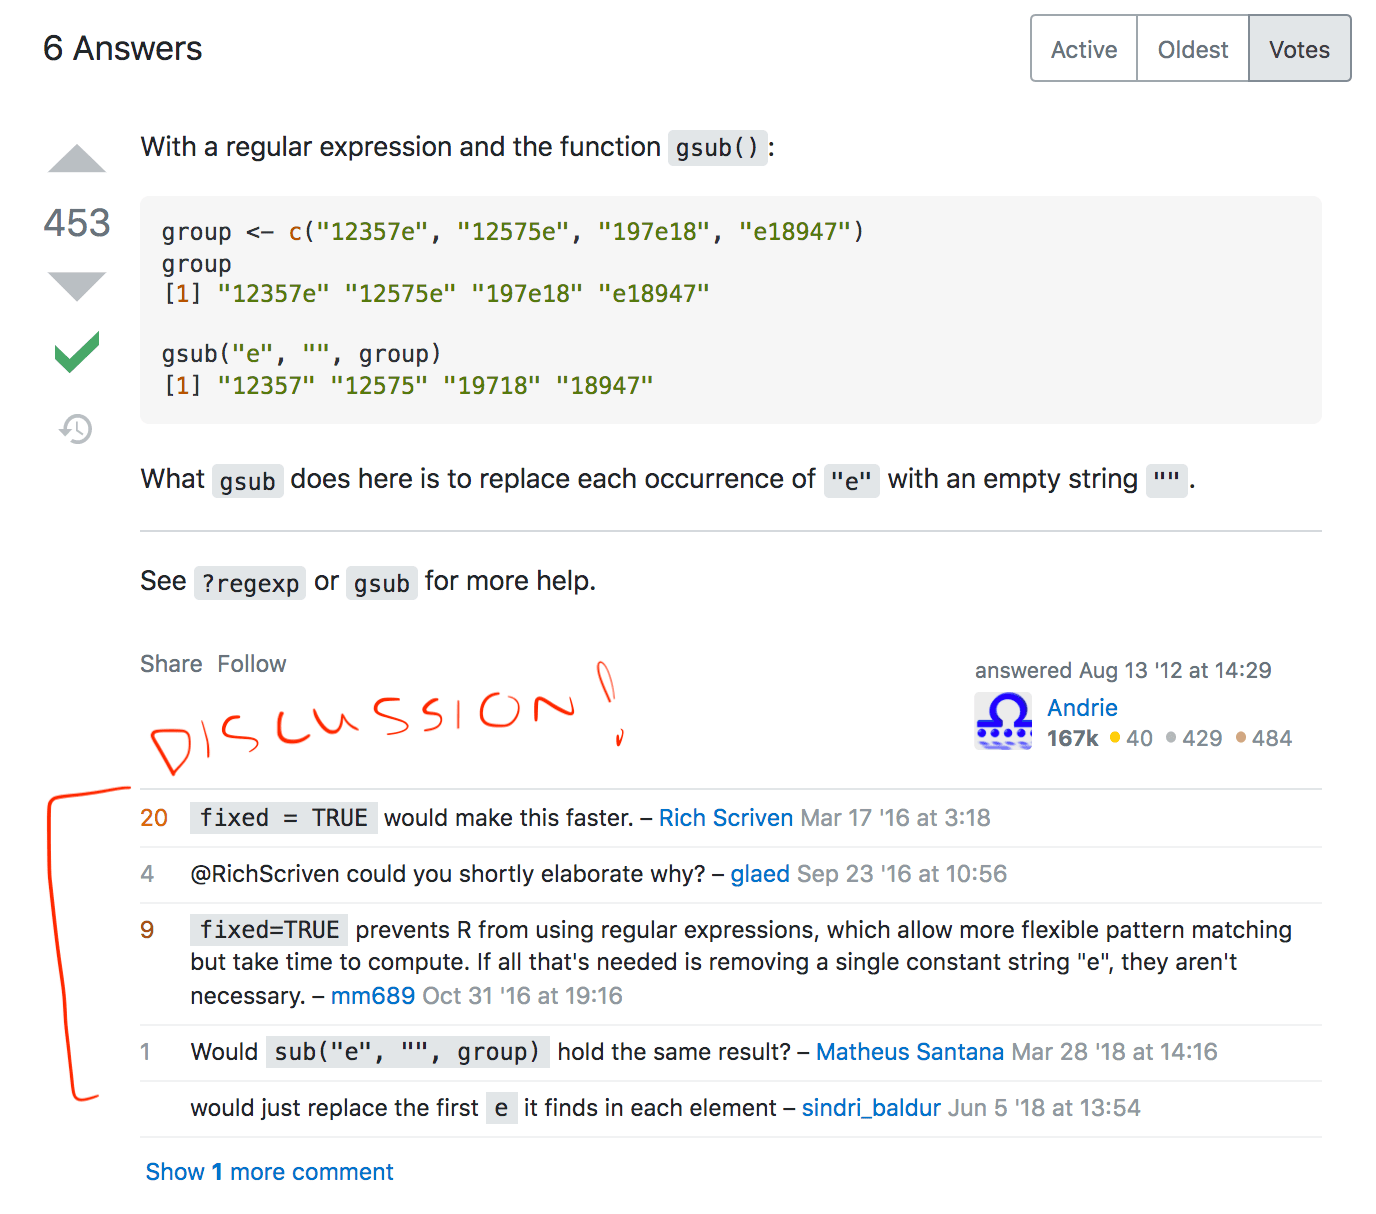 The first answer to the StackOverflow post, showing that it has 453 upvotes as well as other people commenting on the answer and generating further discussion.